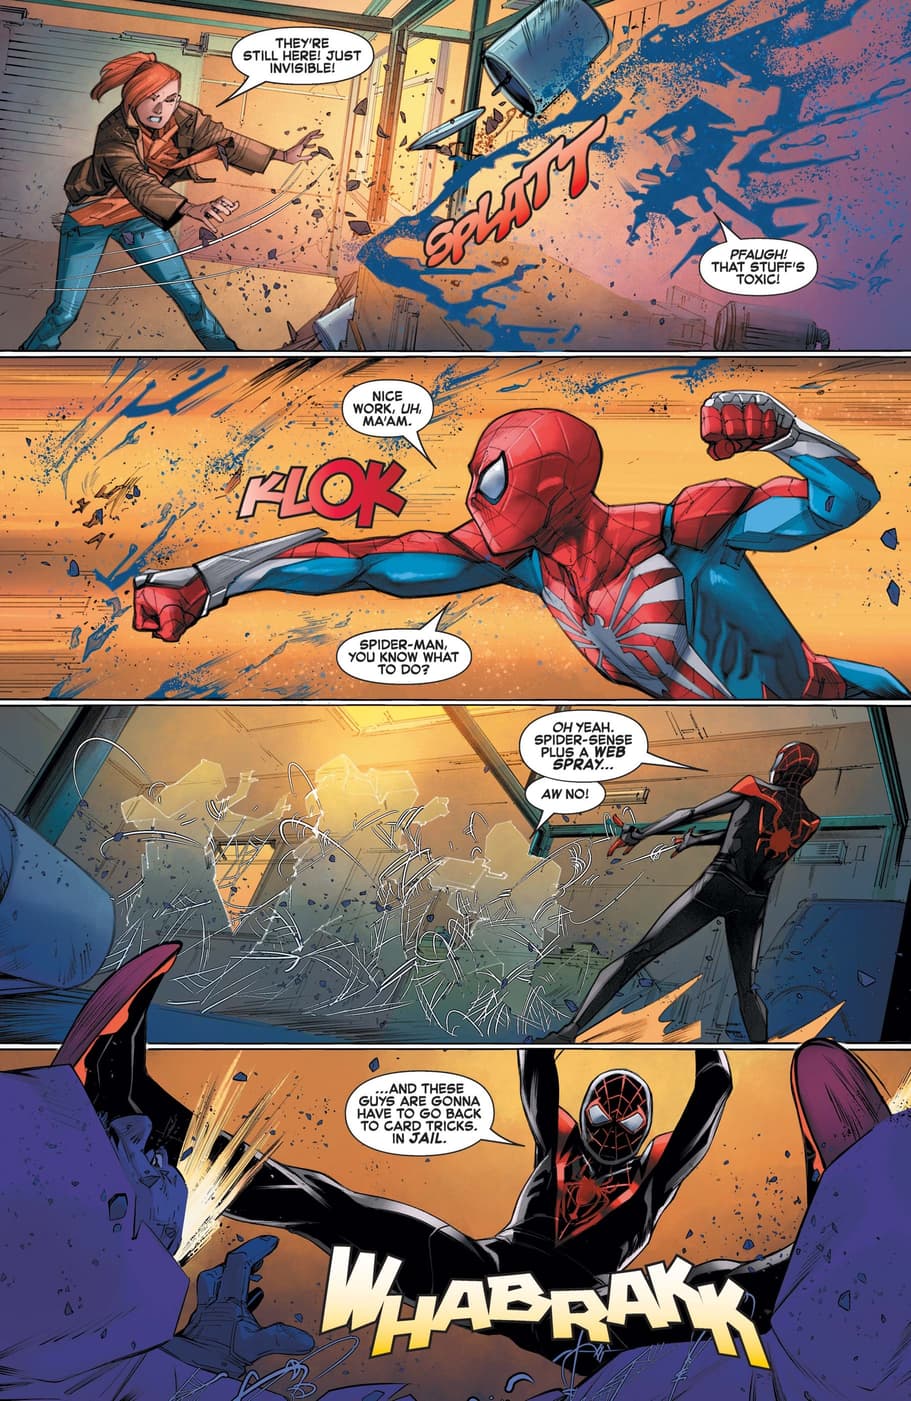 Marvel's Spider-Man 2 Releases Prequel Comic for Free Comic Book